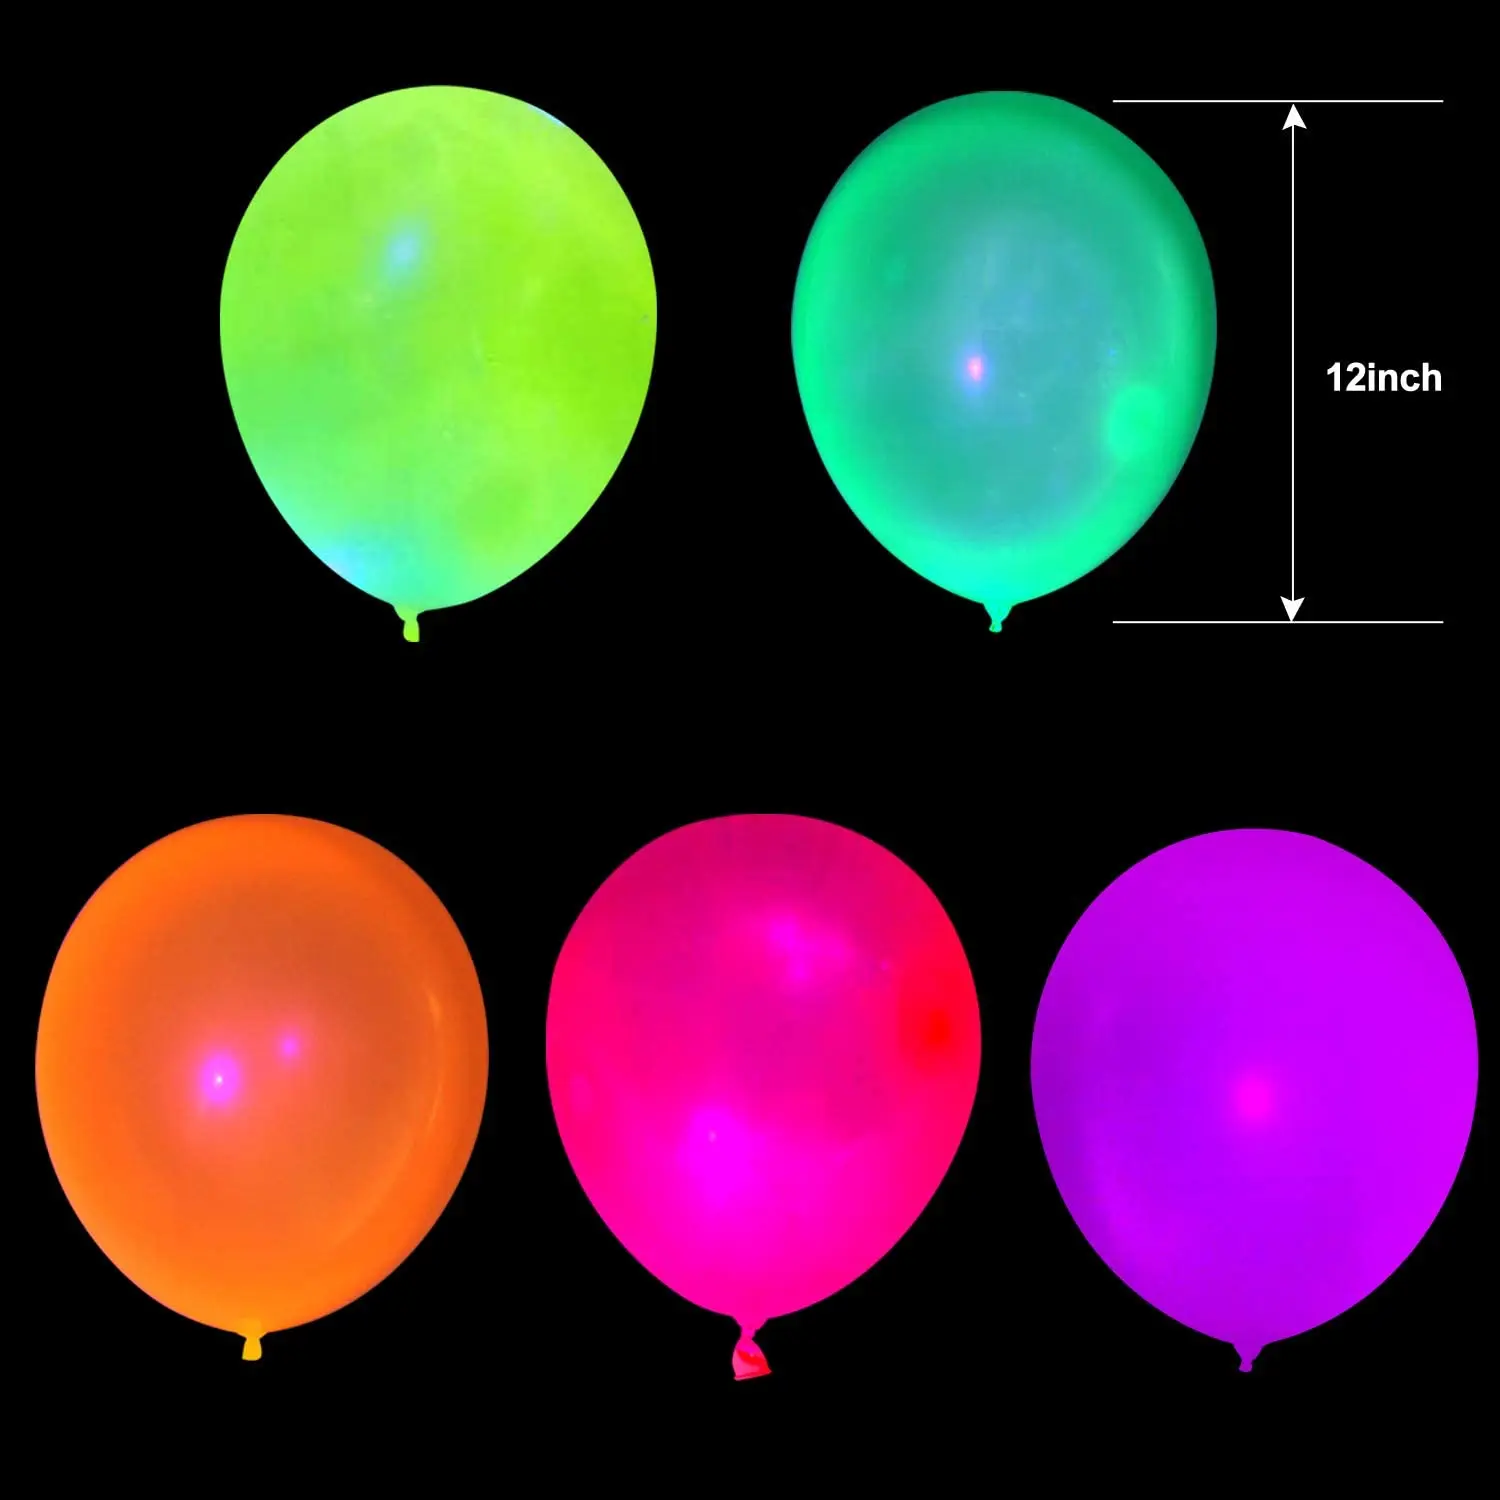 Glow in the Dark Neon Party Balloons for UV Blacklight Events